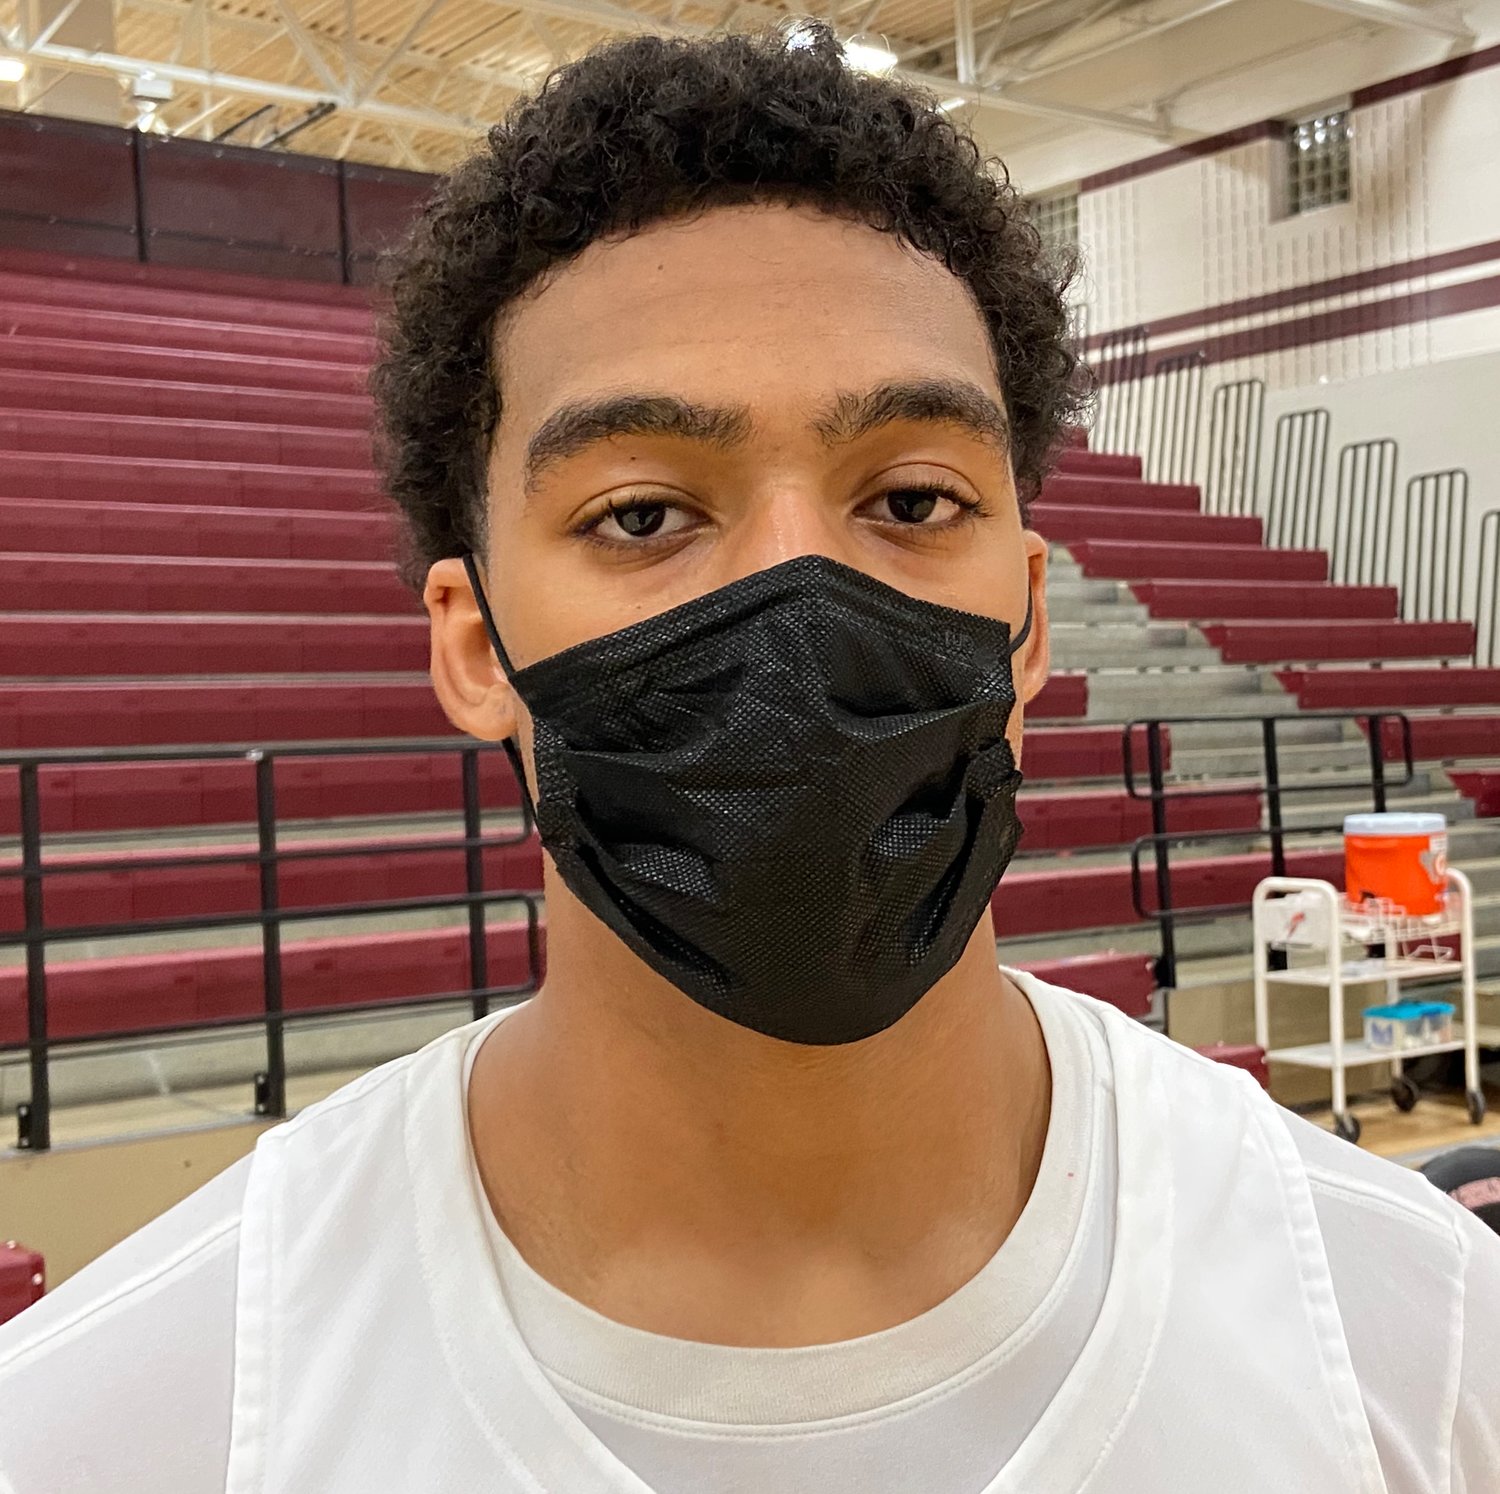 Paetow senior wing Everett Marlatt scored a team-high 10 points, all in the second half, to go with five rebounds in the Panthers’ Class 5A area playoff win over Pflugerville Weiss on Tuesday, Feb. 23, at A&M Consolidated High School in College Station.